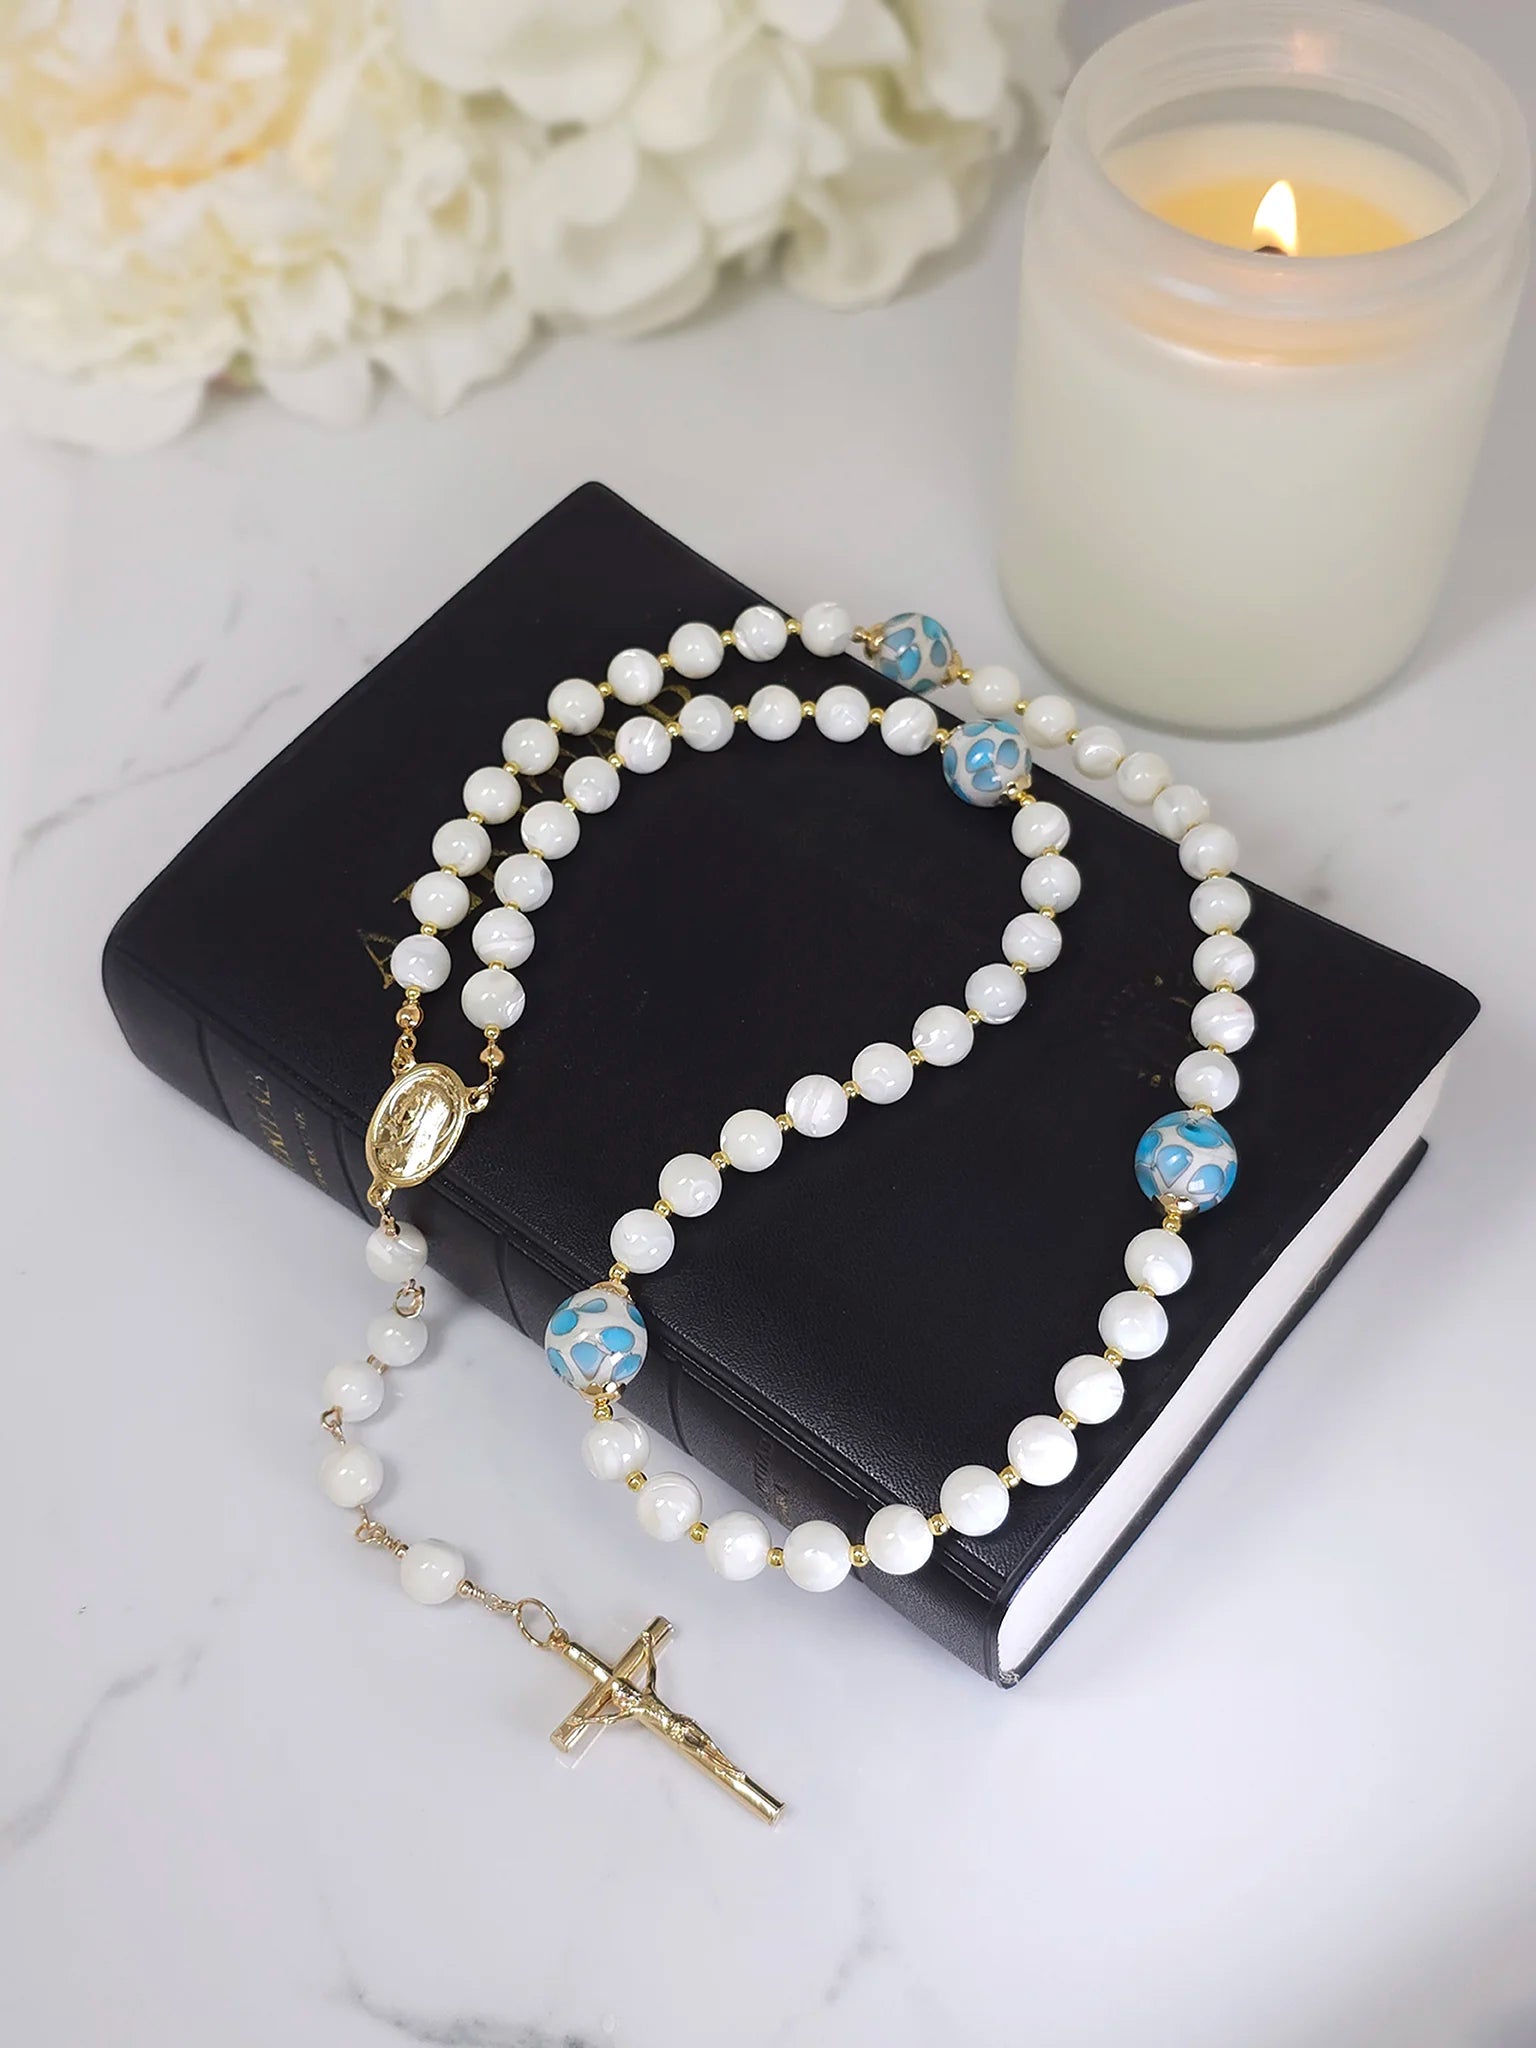 Gold-Plated and Faux Pearl Rosary Beads By Gifted Memories Faith Australia